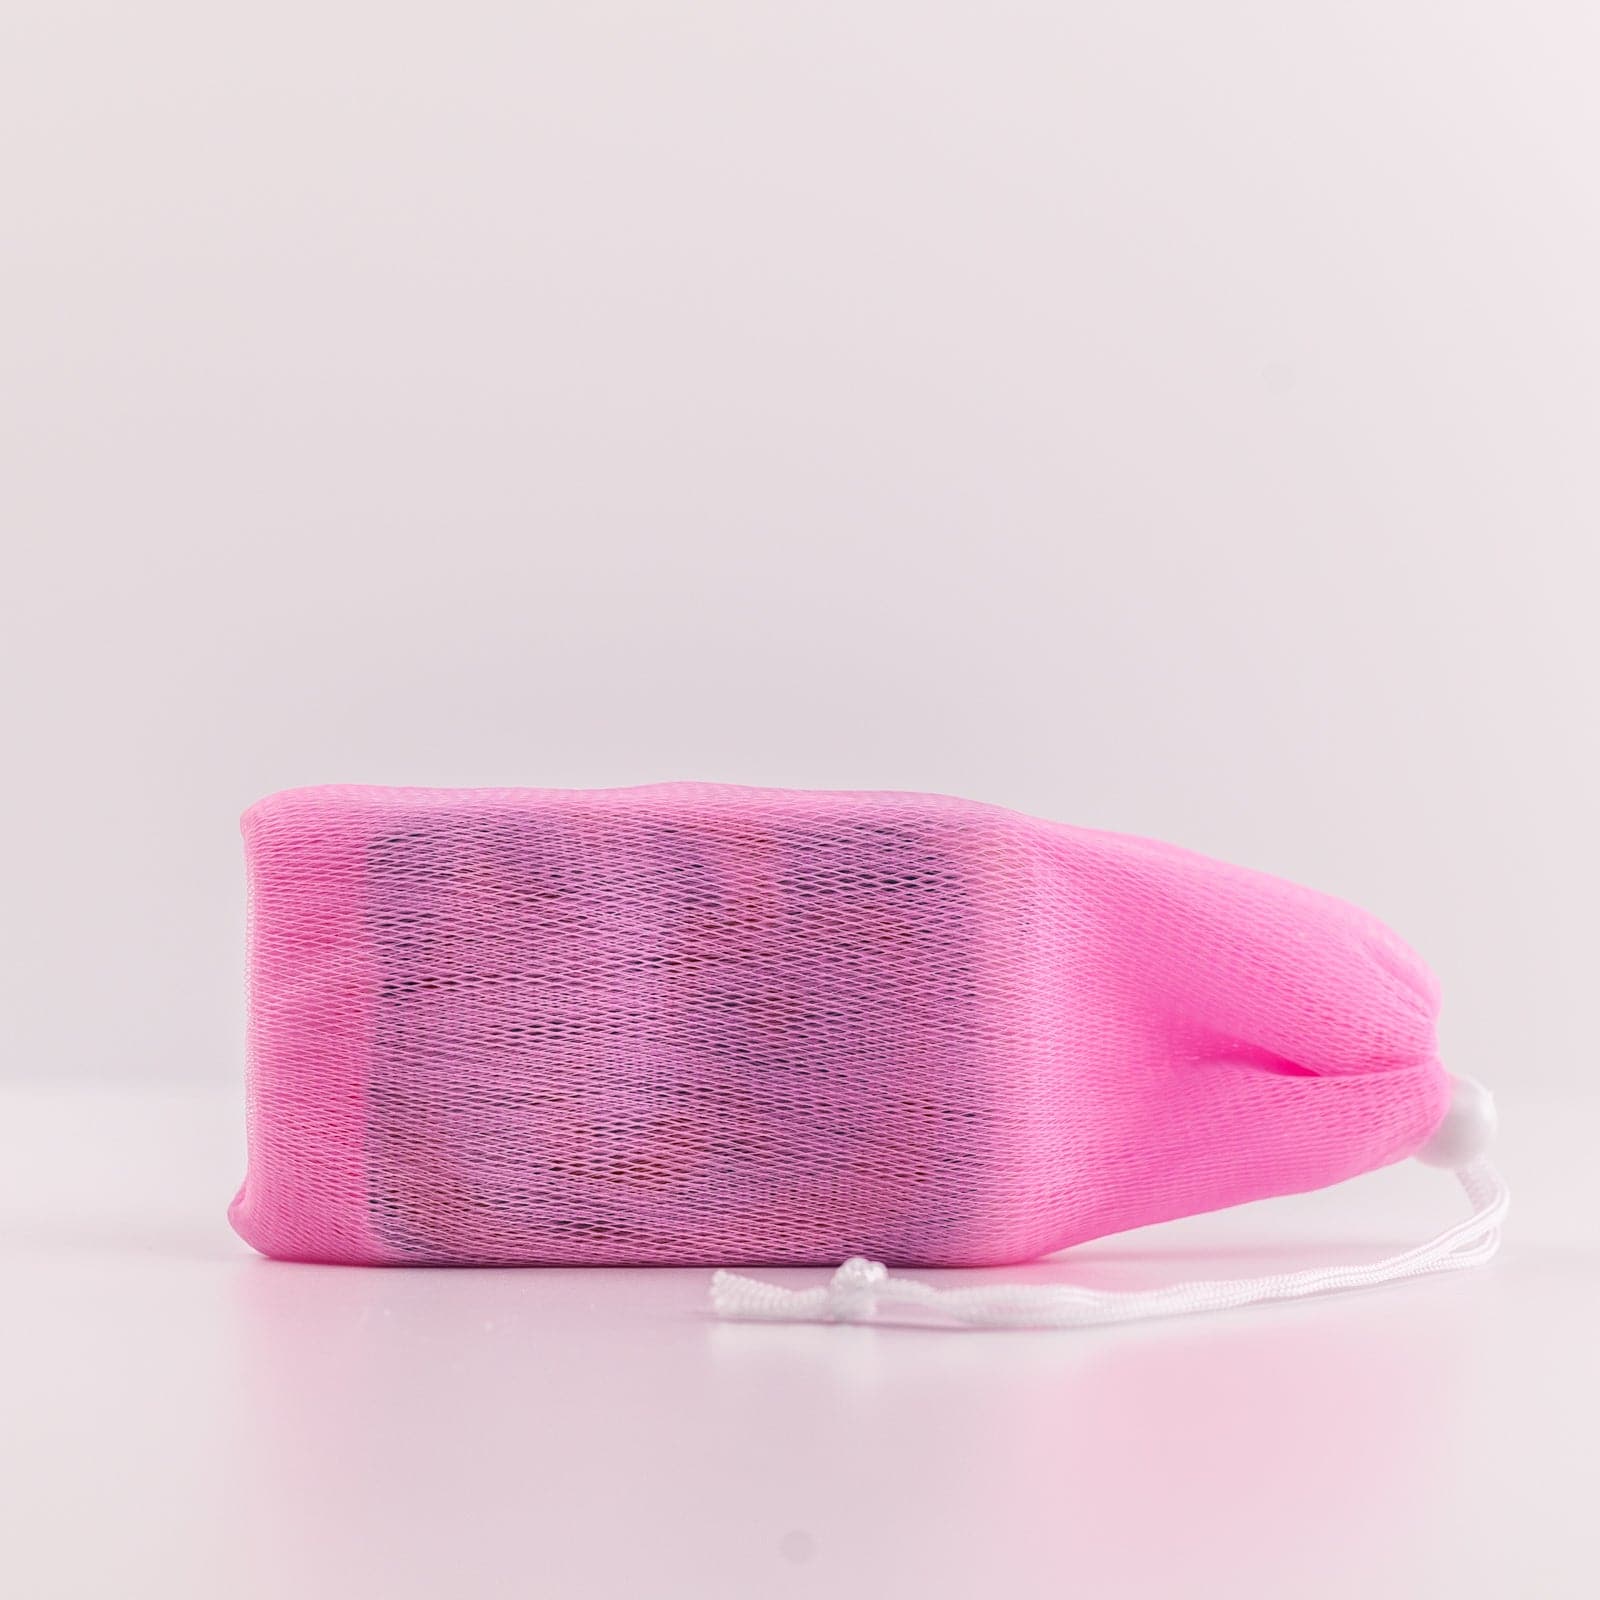 Pink soap sleeve on side